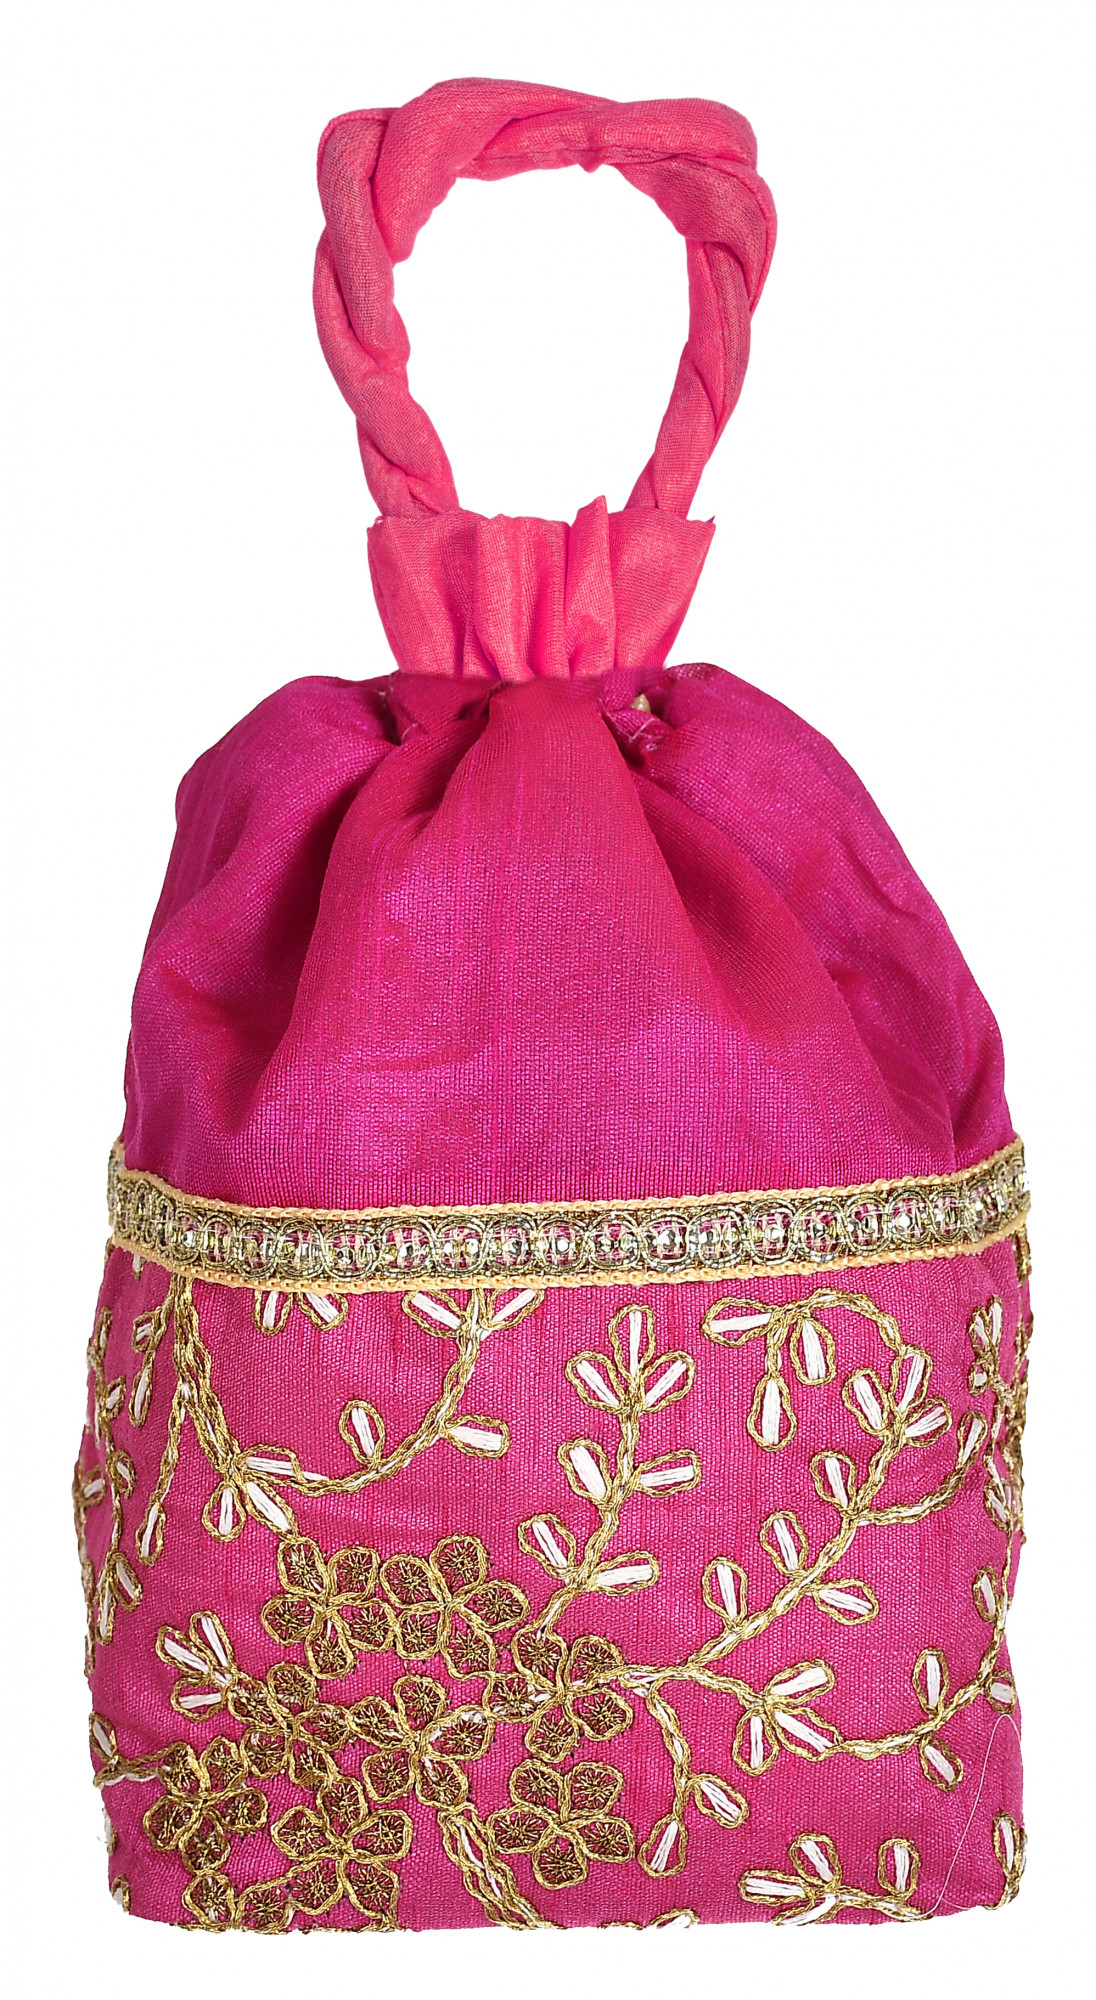 Kuber Industries Embroidered Design Drawstring Potli Bag Party Wedding Favor Gift Jewelry Bags-(Pink)